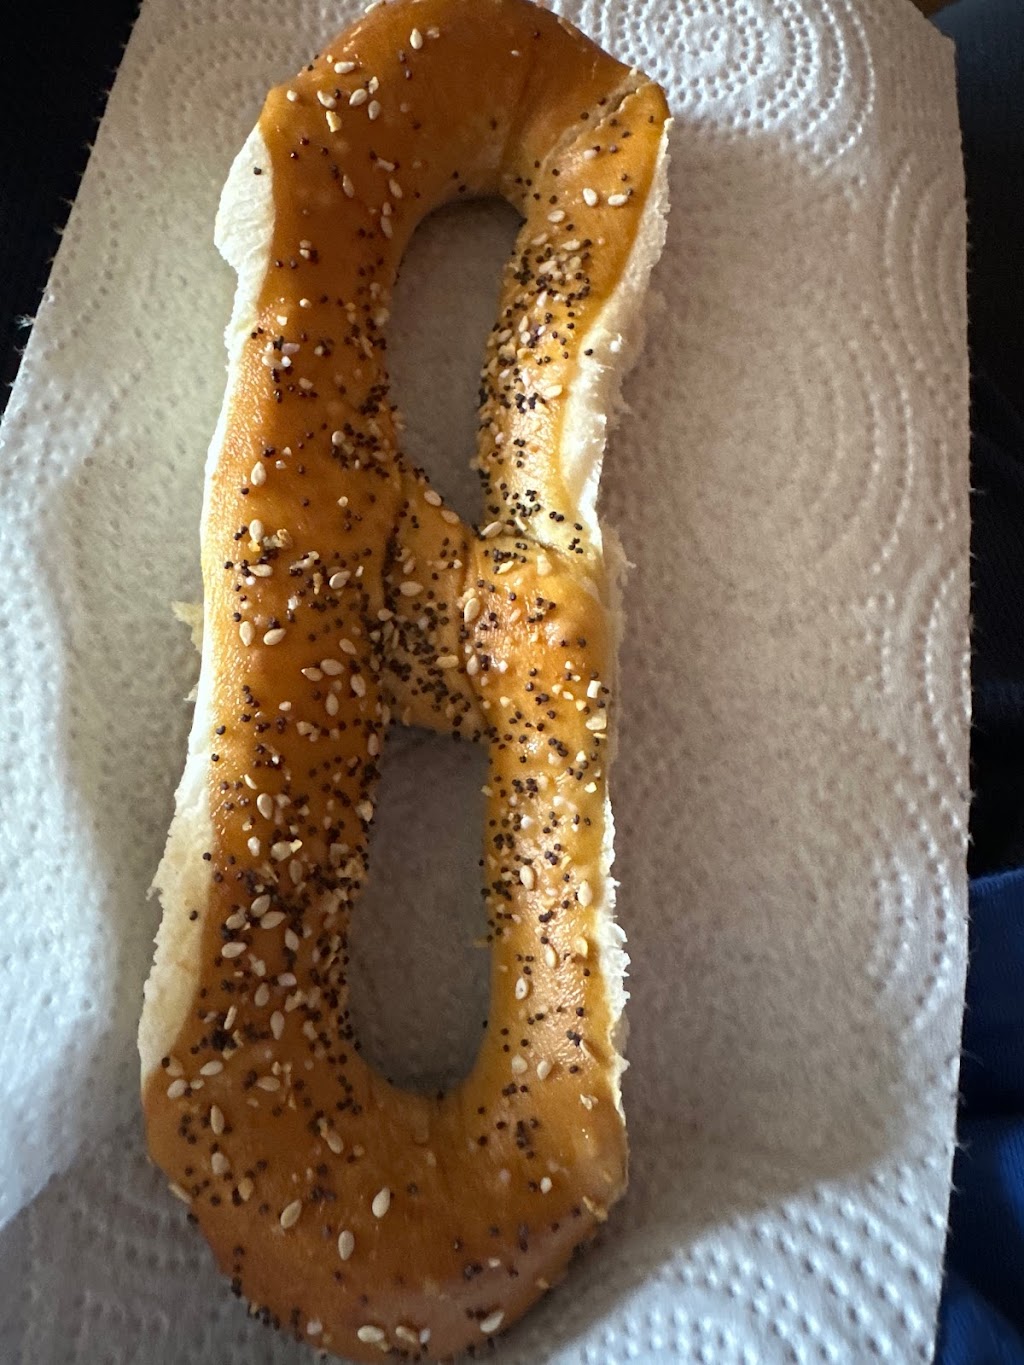 Philly Style Soft Pretzel | 920 Woodbourne Rd, Levittown, PA 19057 | Phone: (215) 946-0300